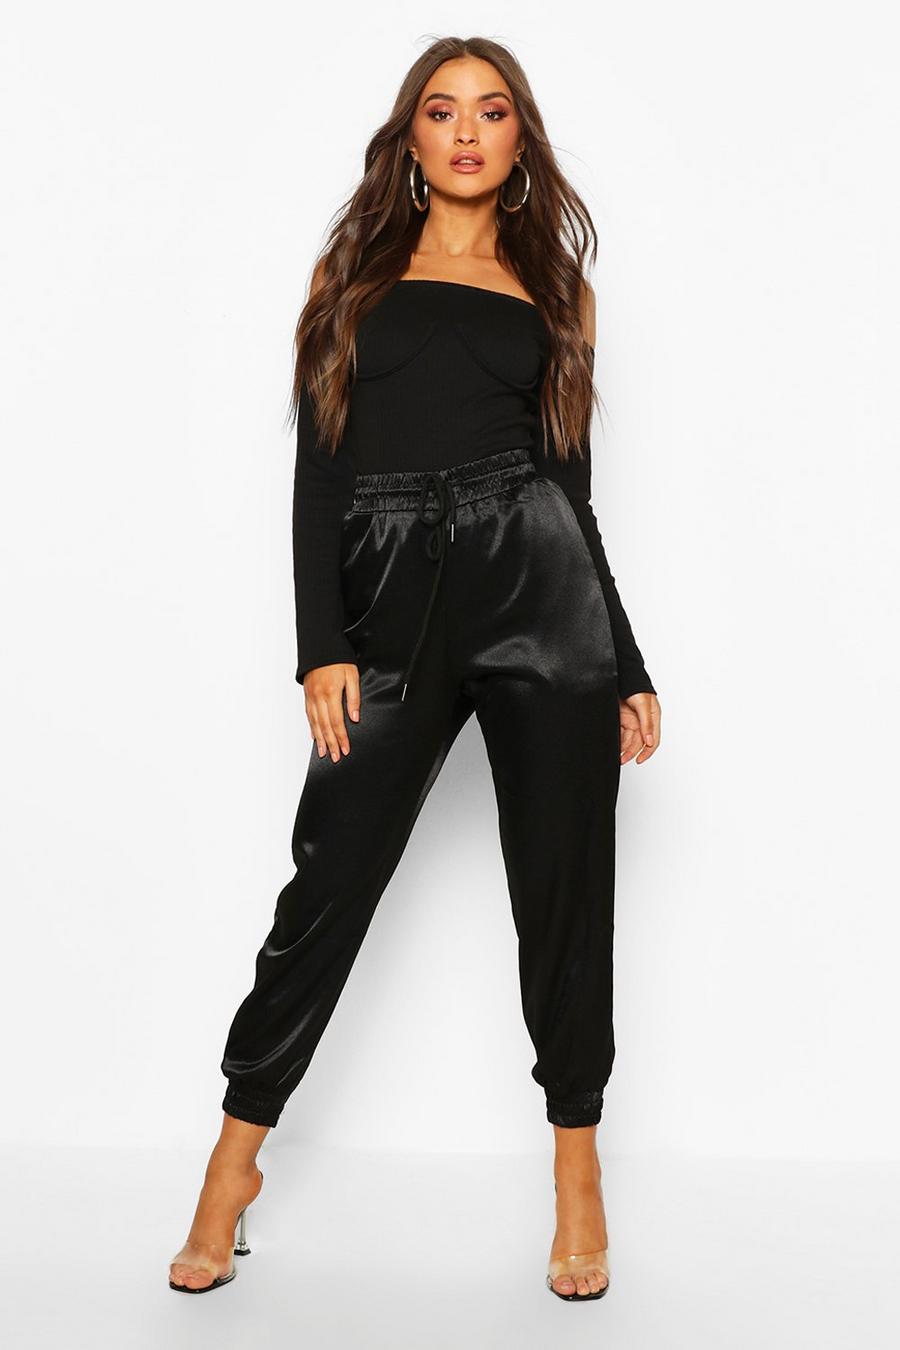 Black Satin Joggers  PrettyLittleThing IRE